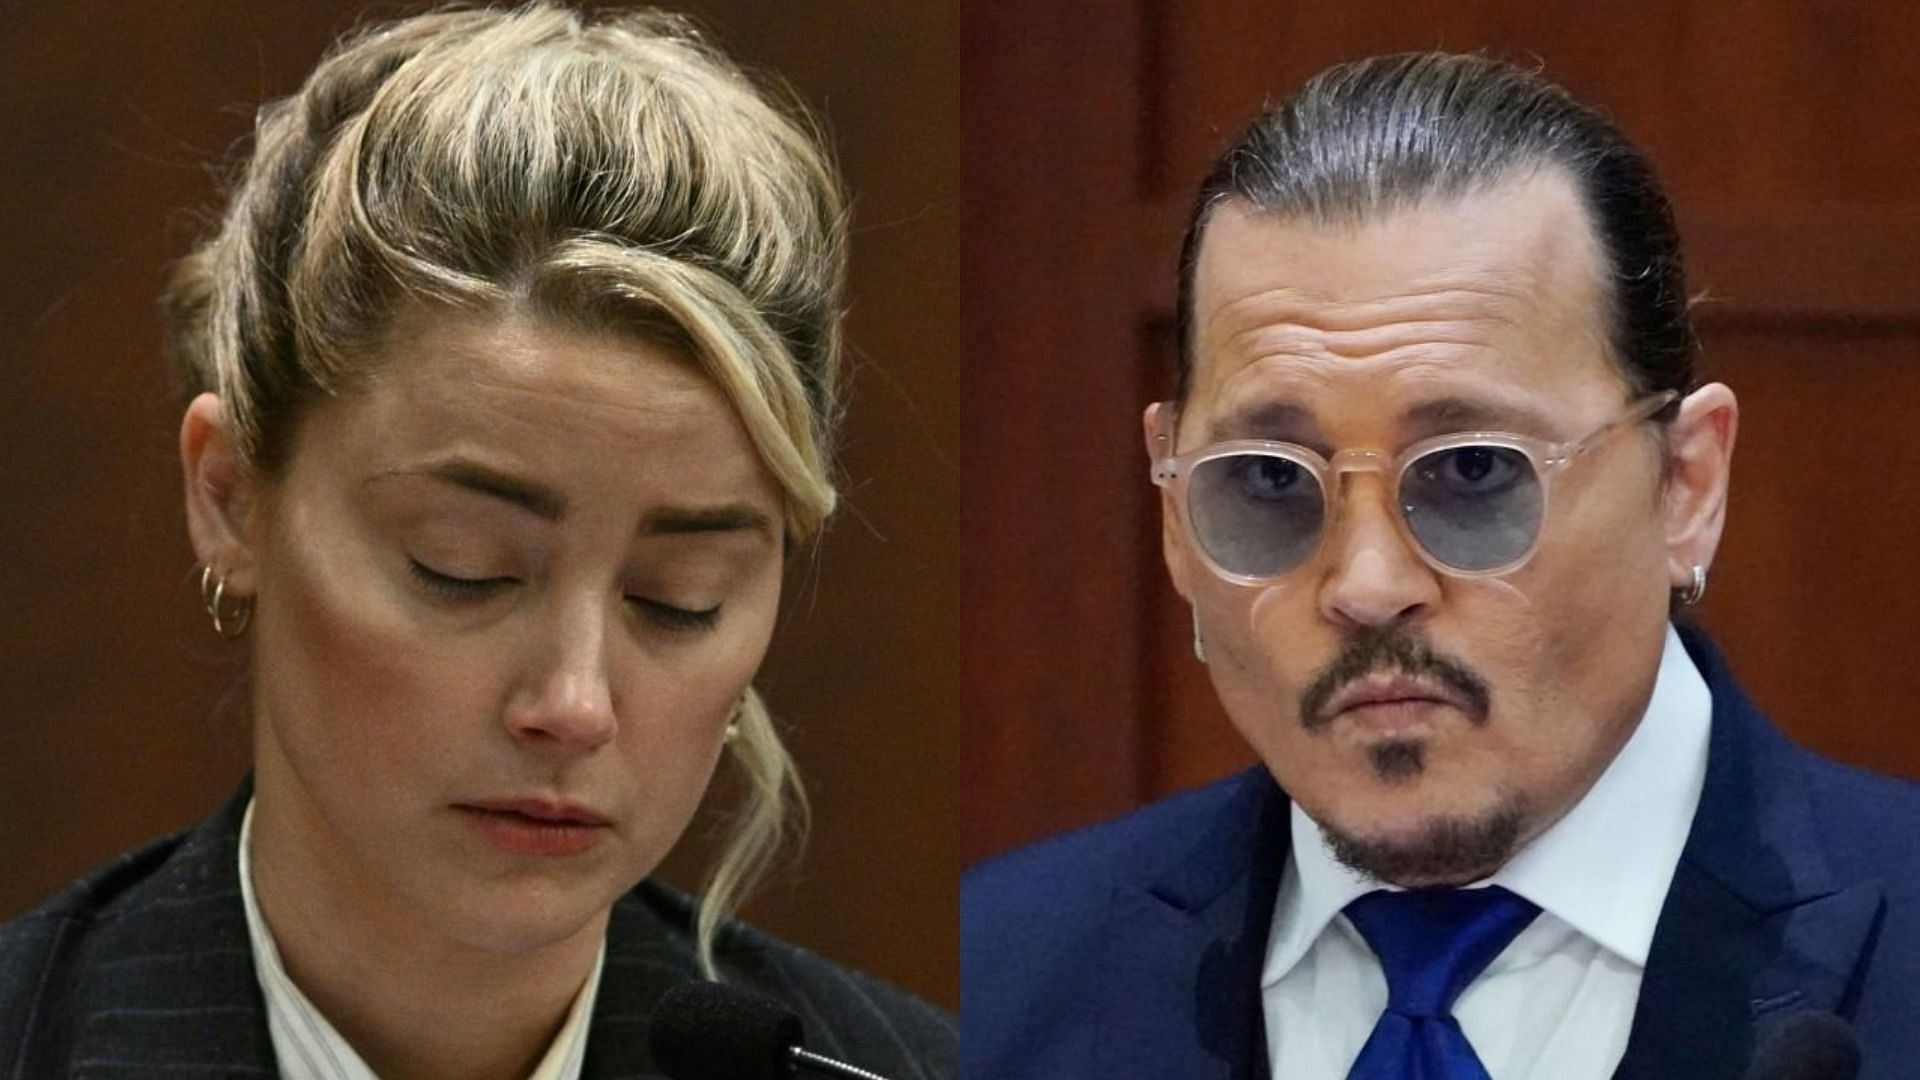 Johnny Depp reportedly said he has &quot;no ill wishes&quot; towards Amber Heard (Image via Getty Images)